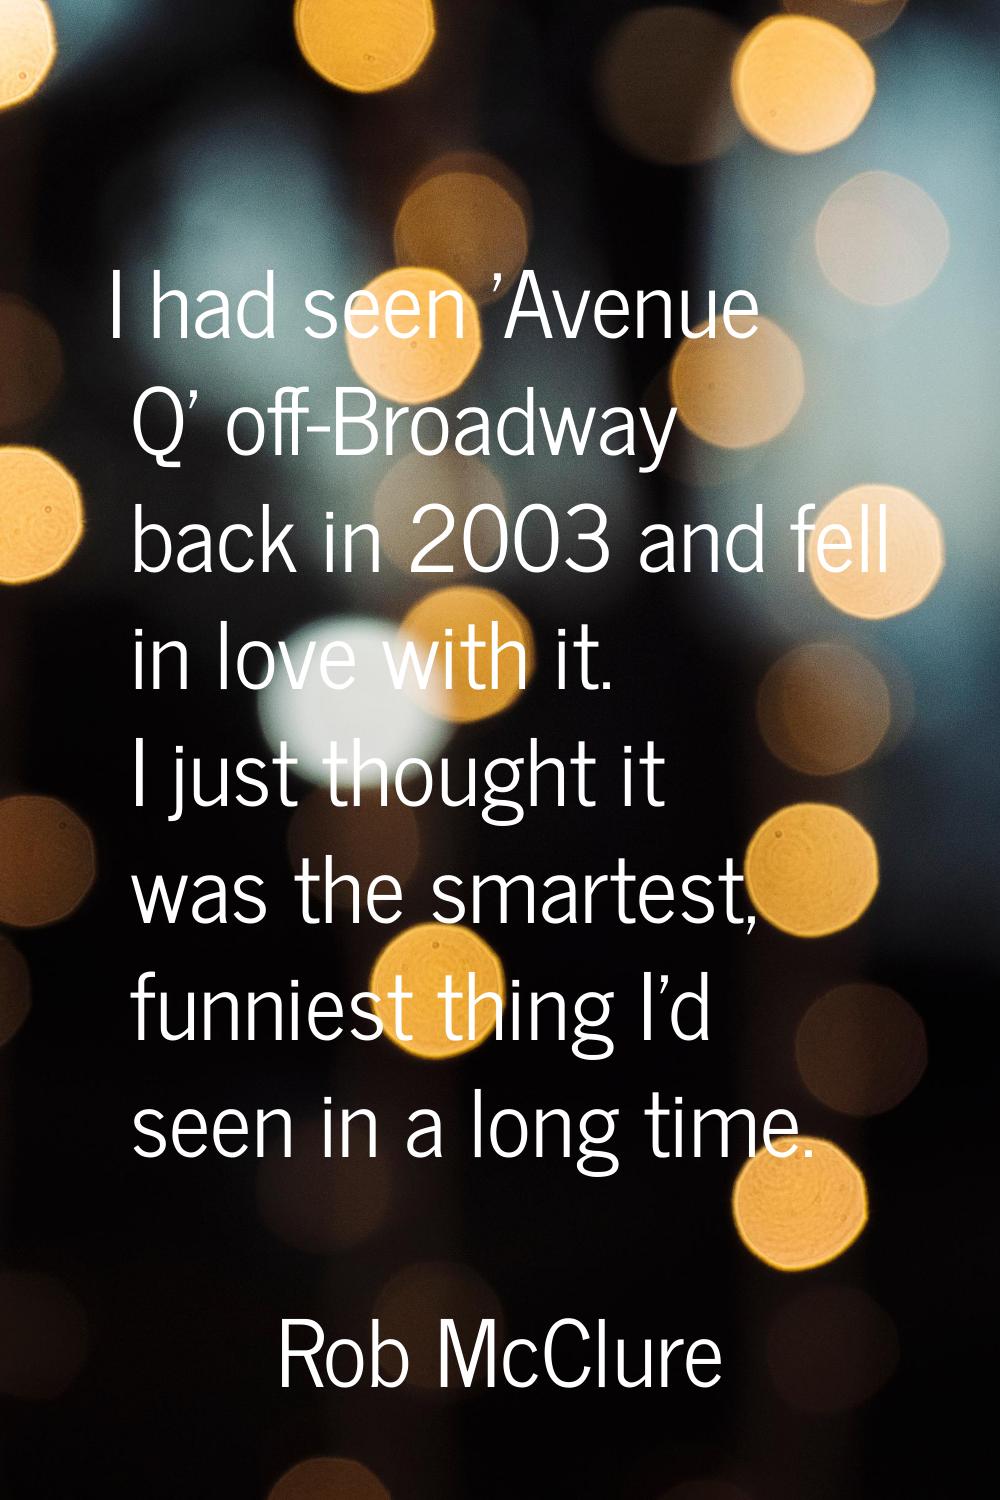 I had seen 'Avenue Q' off-Broadway back in 2003 and fell in love with it. I just thought it was the